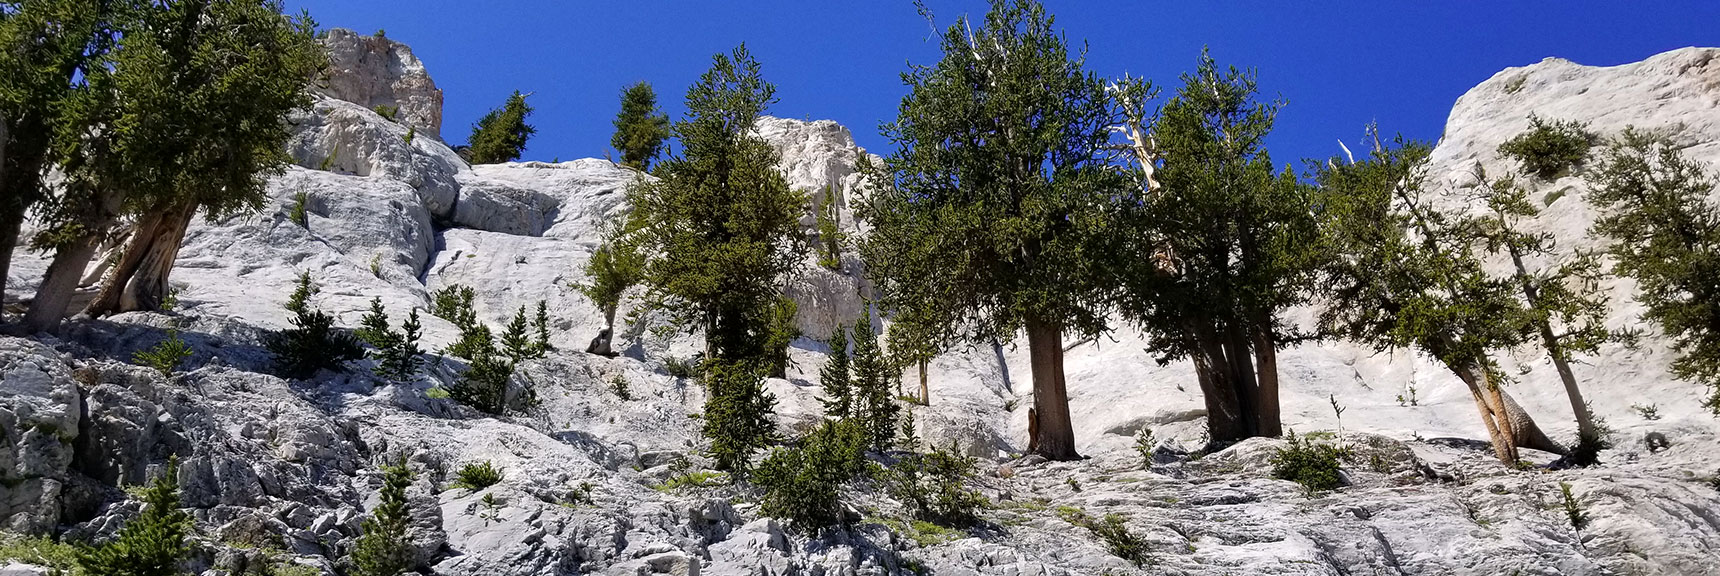 Arrival at the Base of the East Cliff of Mummy Mountain in Mt. Charleston Wilderness, Nevada